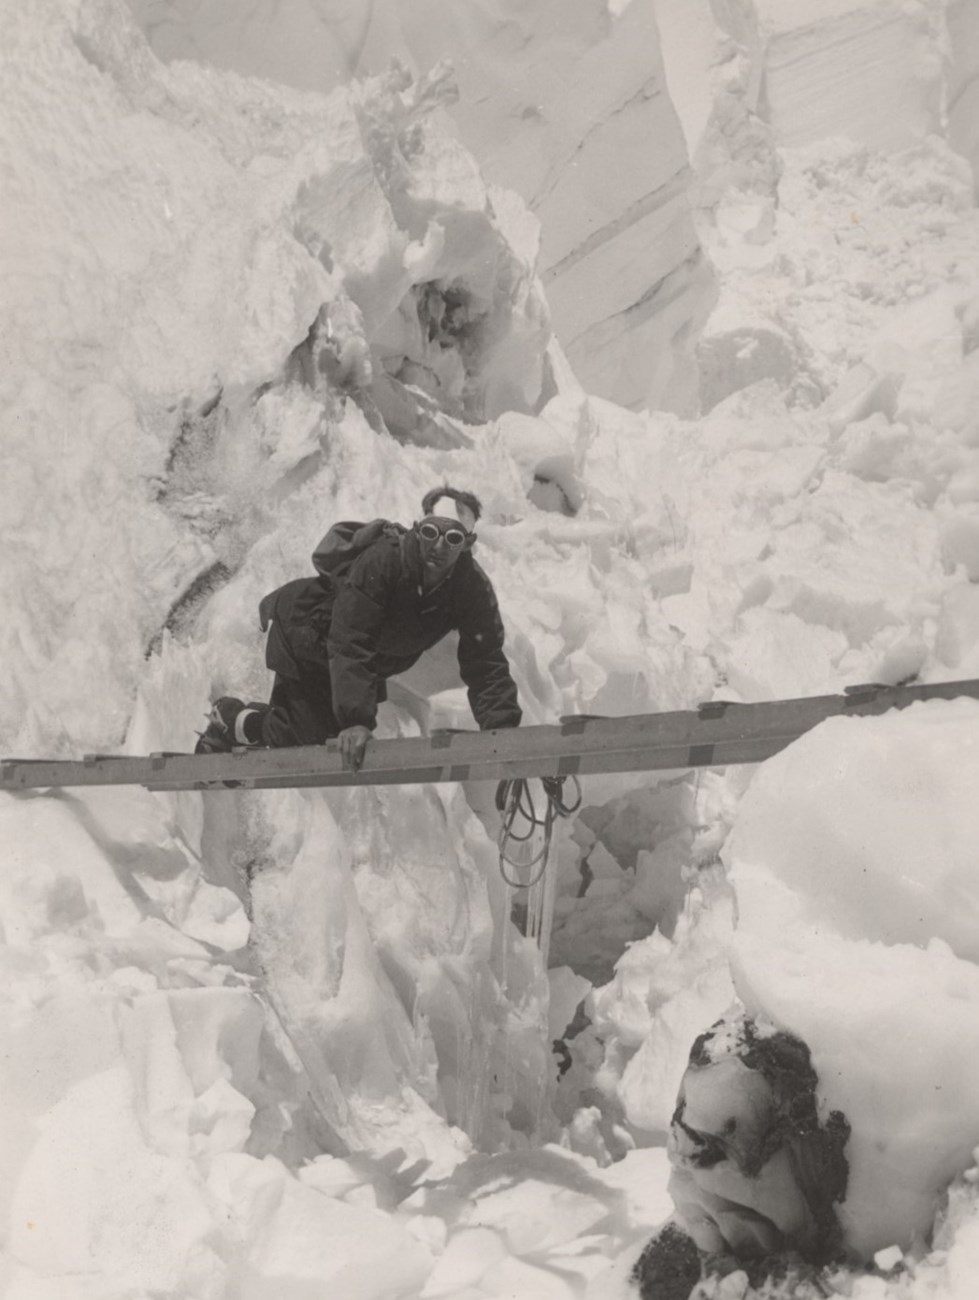 Man in climbing gear crawling across a ladder that spans a crevasse